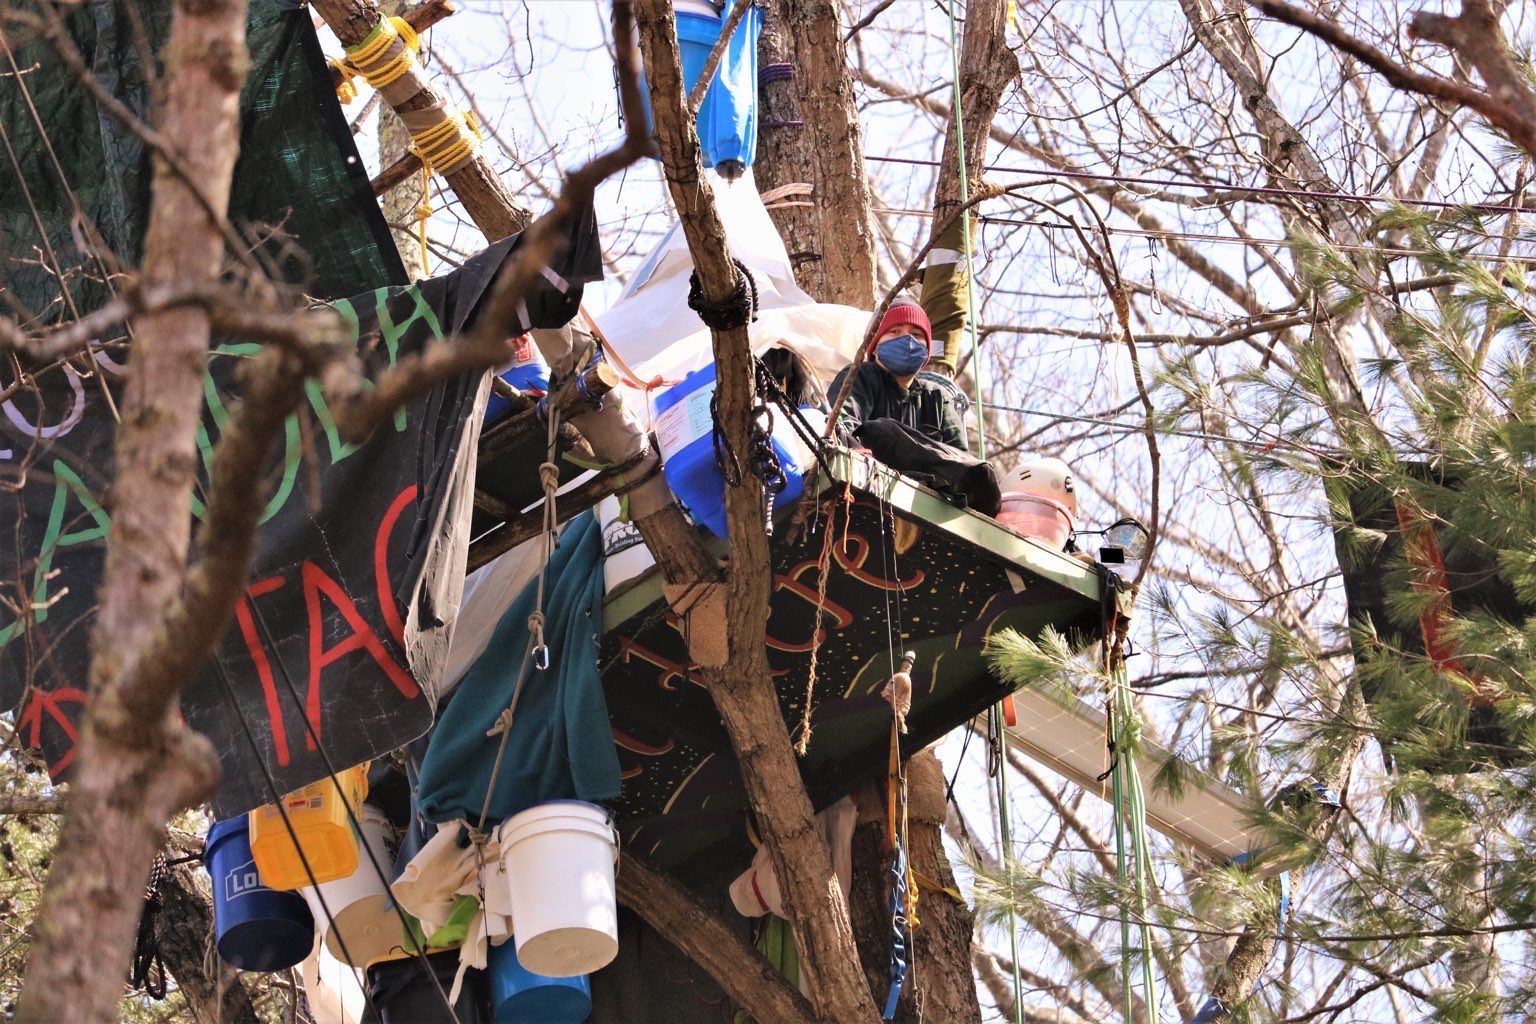 person sits on a platform in a tree that is attached to banners and buckets